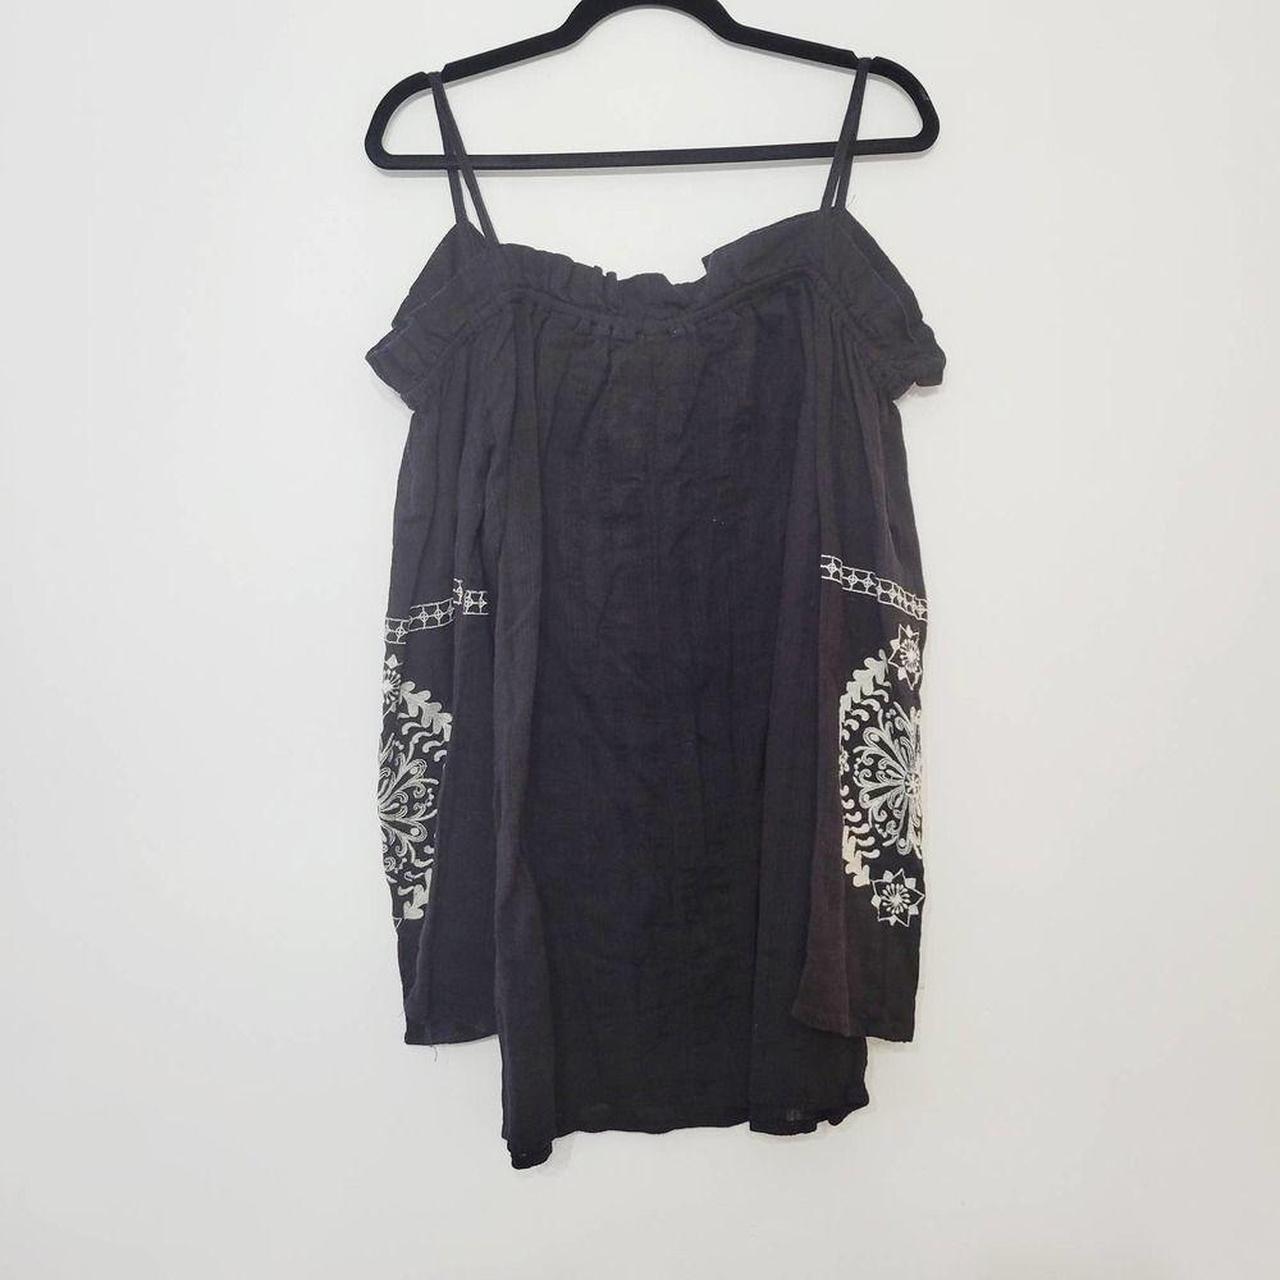 Product Image 3 - Wet Seal Womens Black/White Embroidered